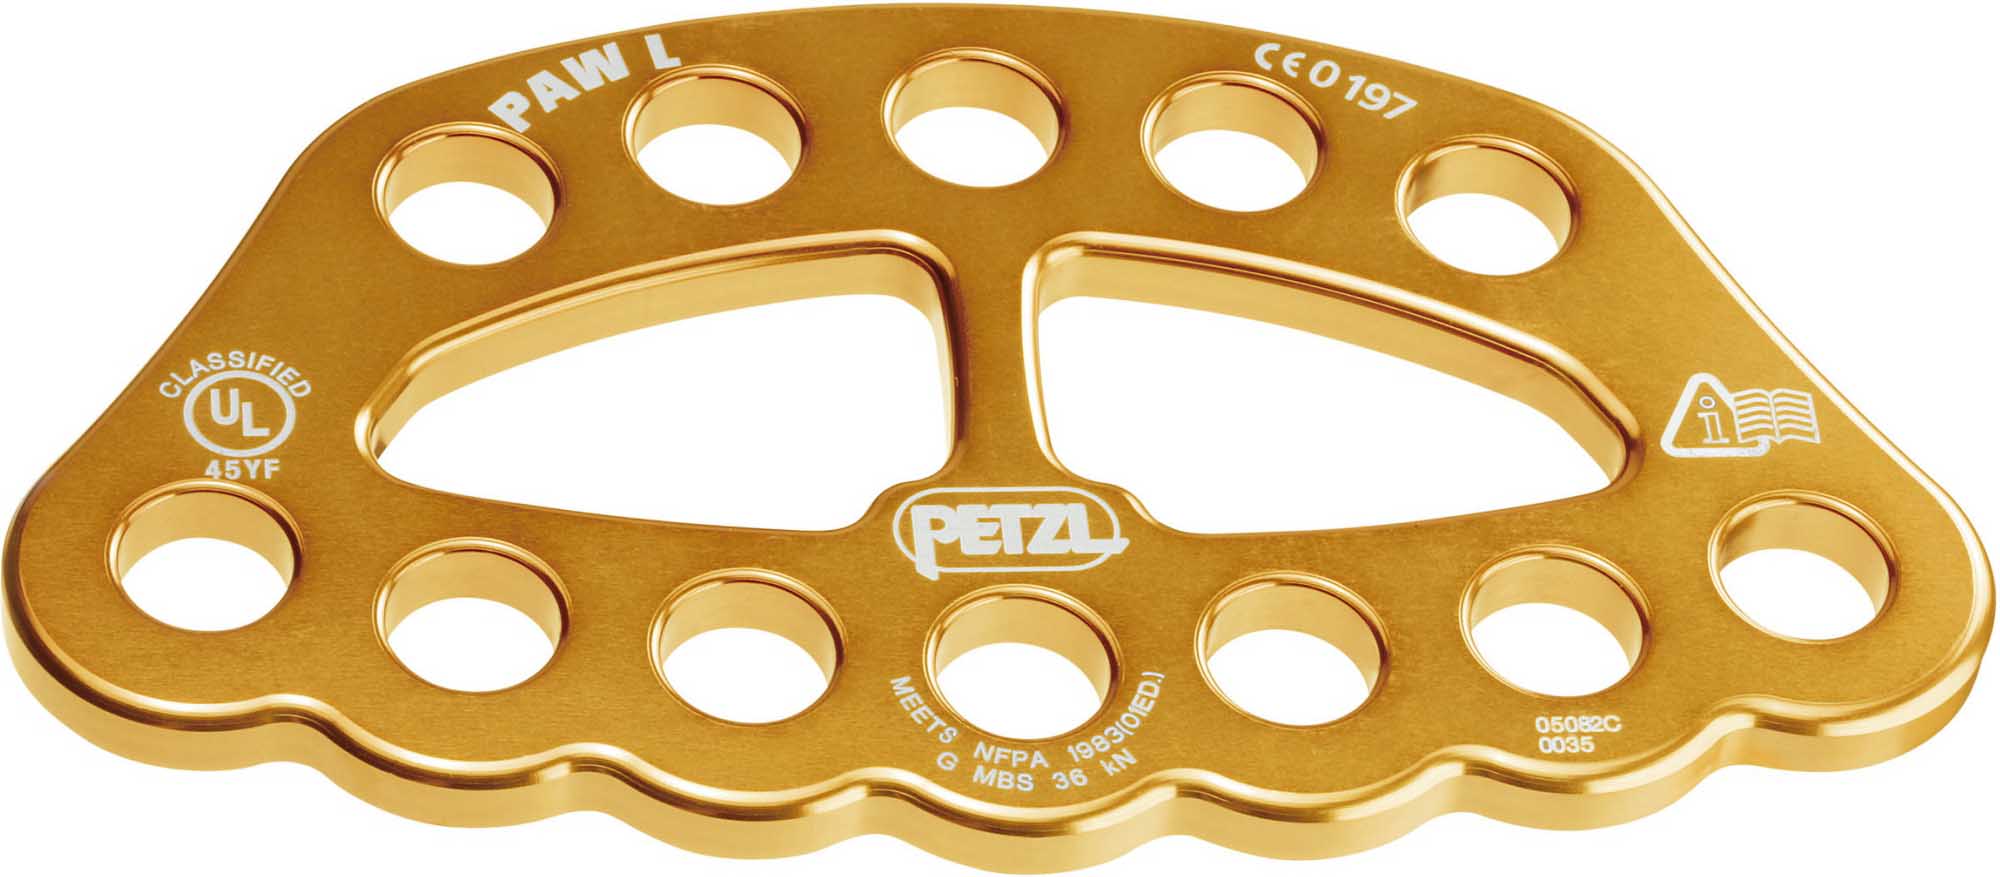 Petzl Paw Rigging Anchor Plate - Large from GME Supply